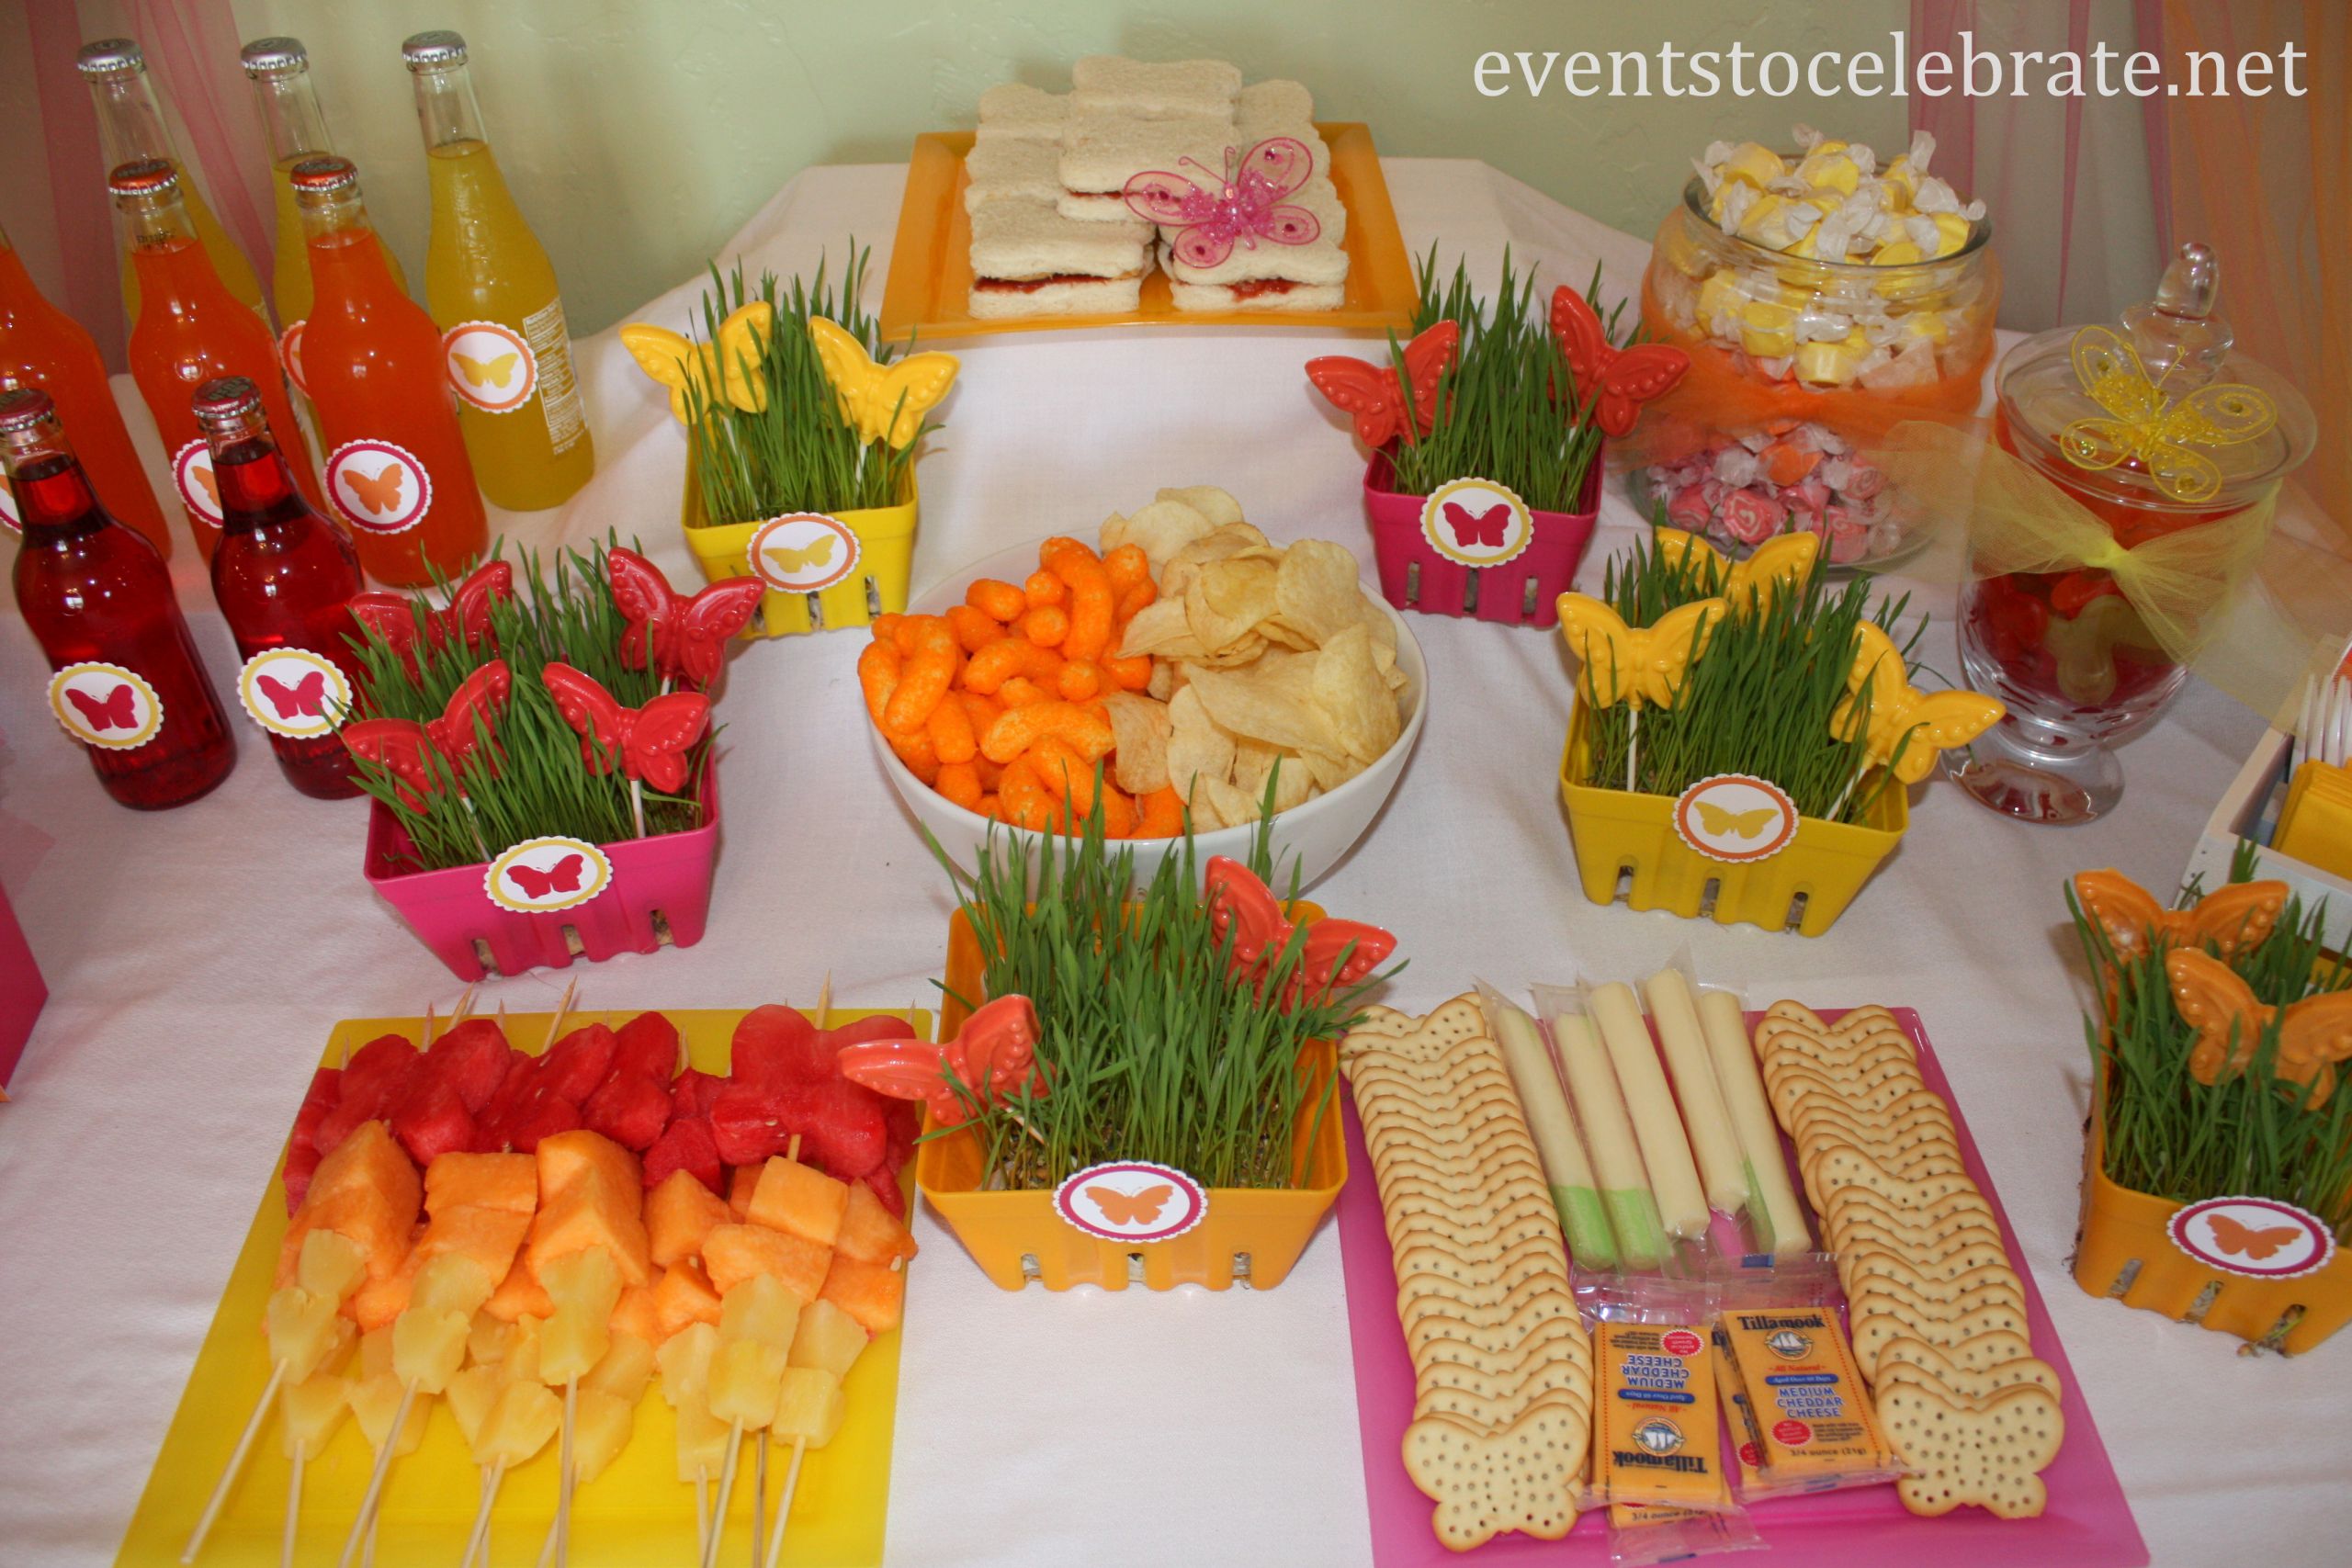 Baby Birthday Party Food Ideas
 butterfly food ideas Archives events to CELEBRATE